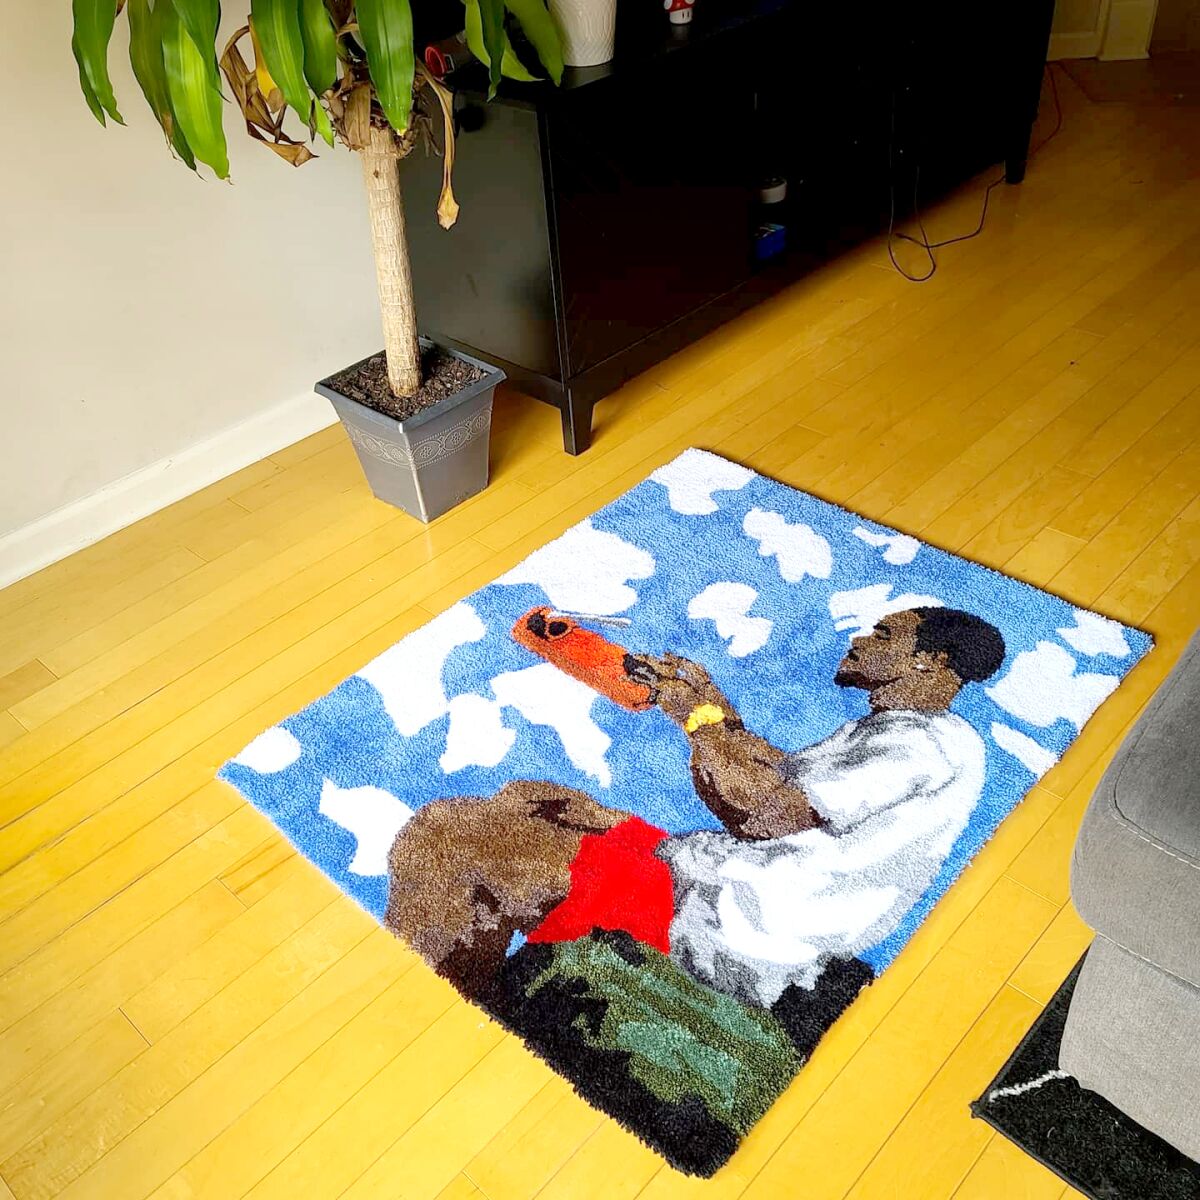 A rug depicts musician Frank Ocean seated and typing on a floating typewriter.